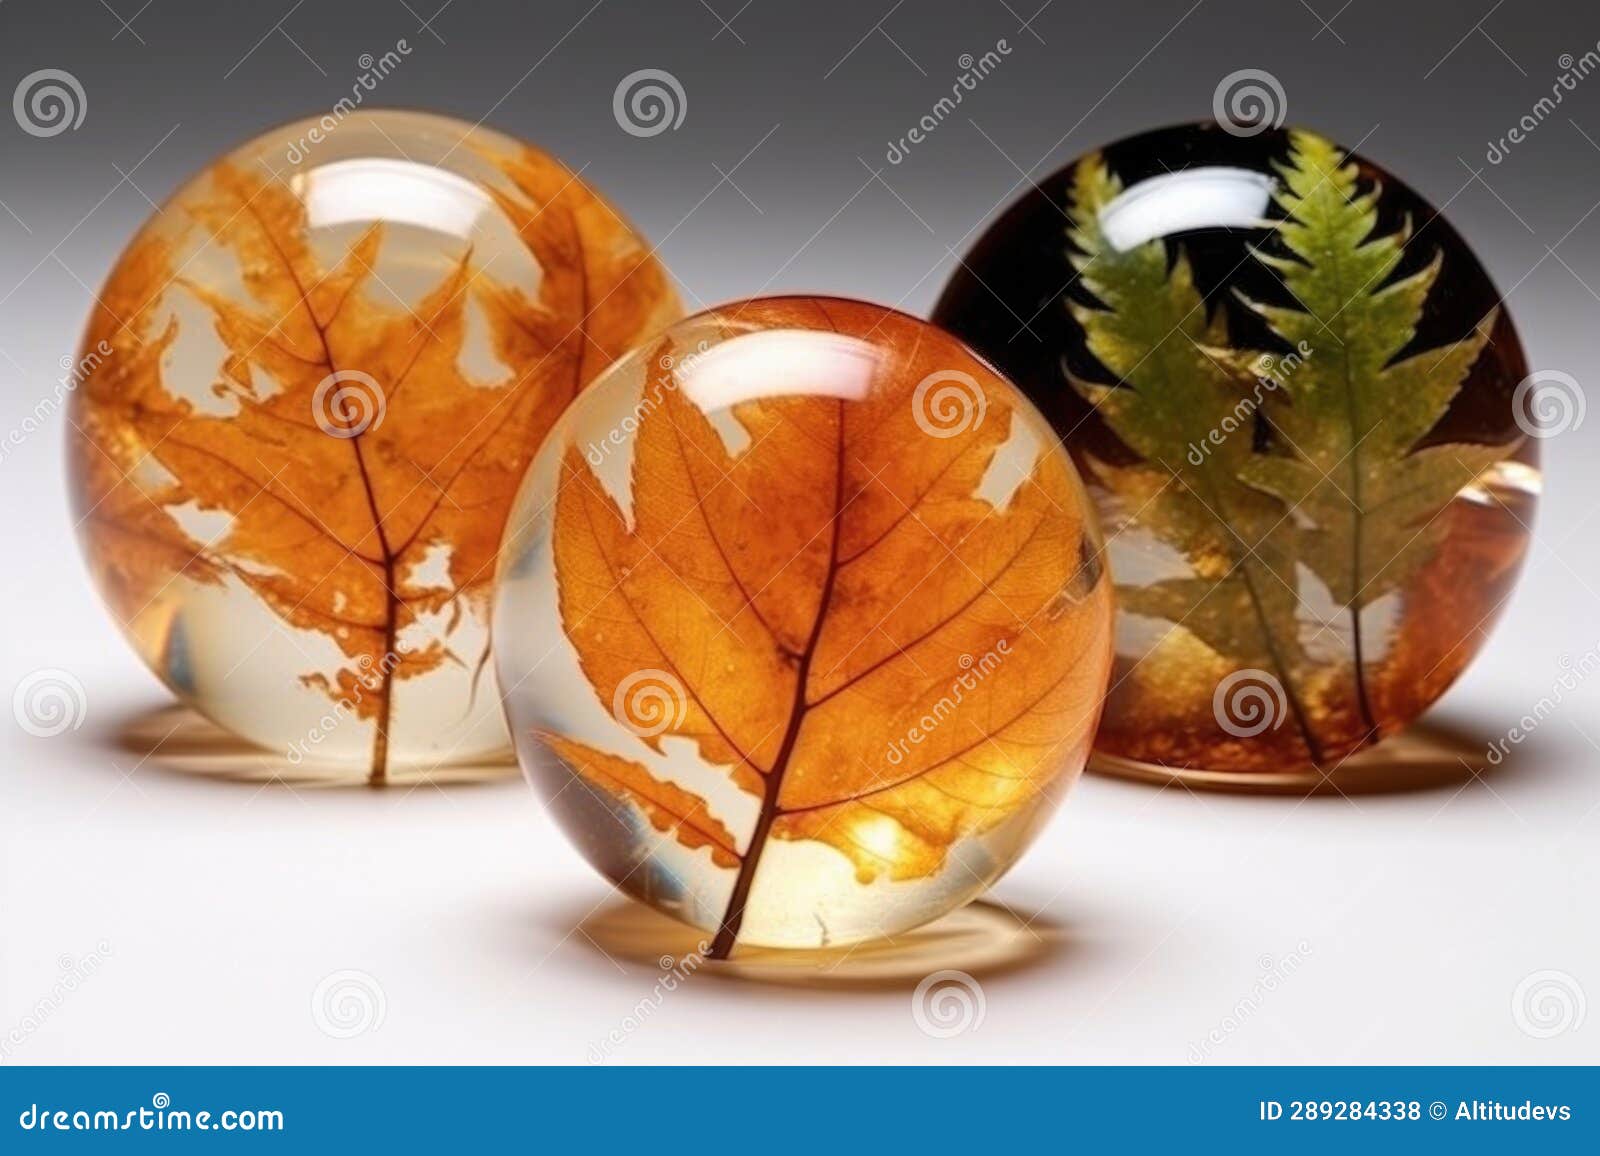 resin paperweights with a variety of preserved leaves